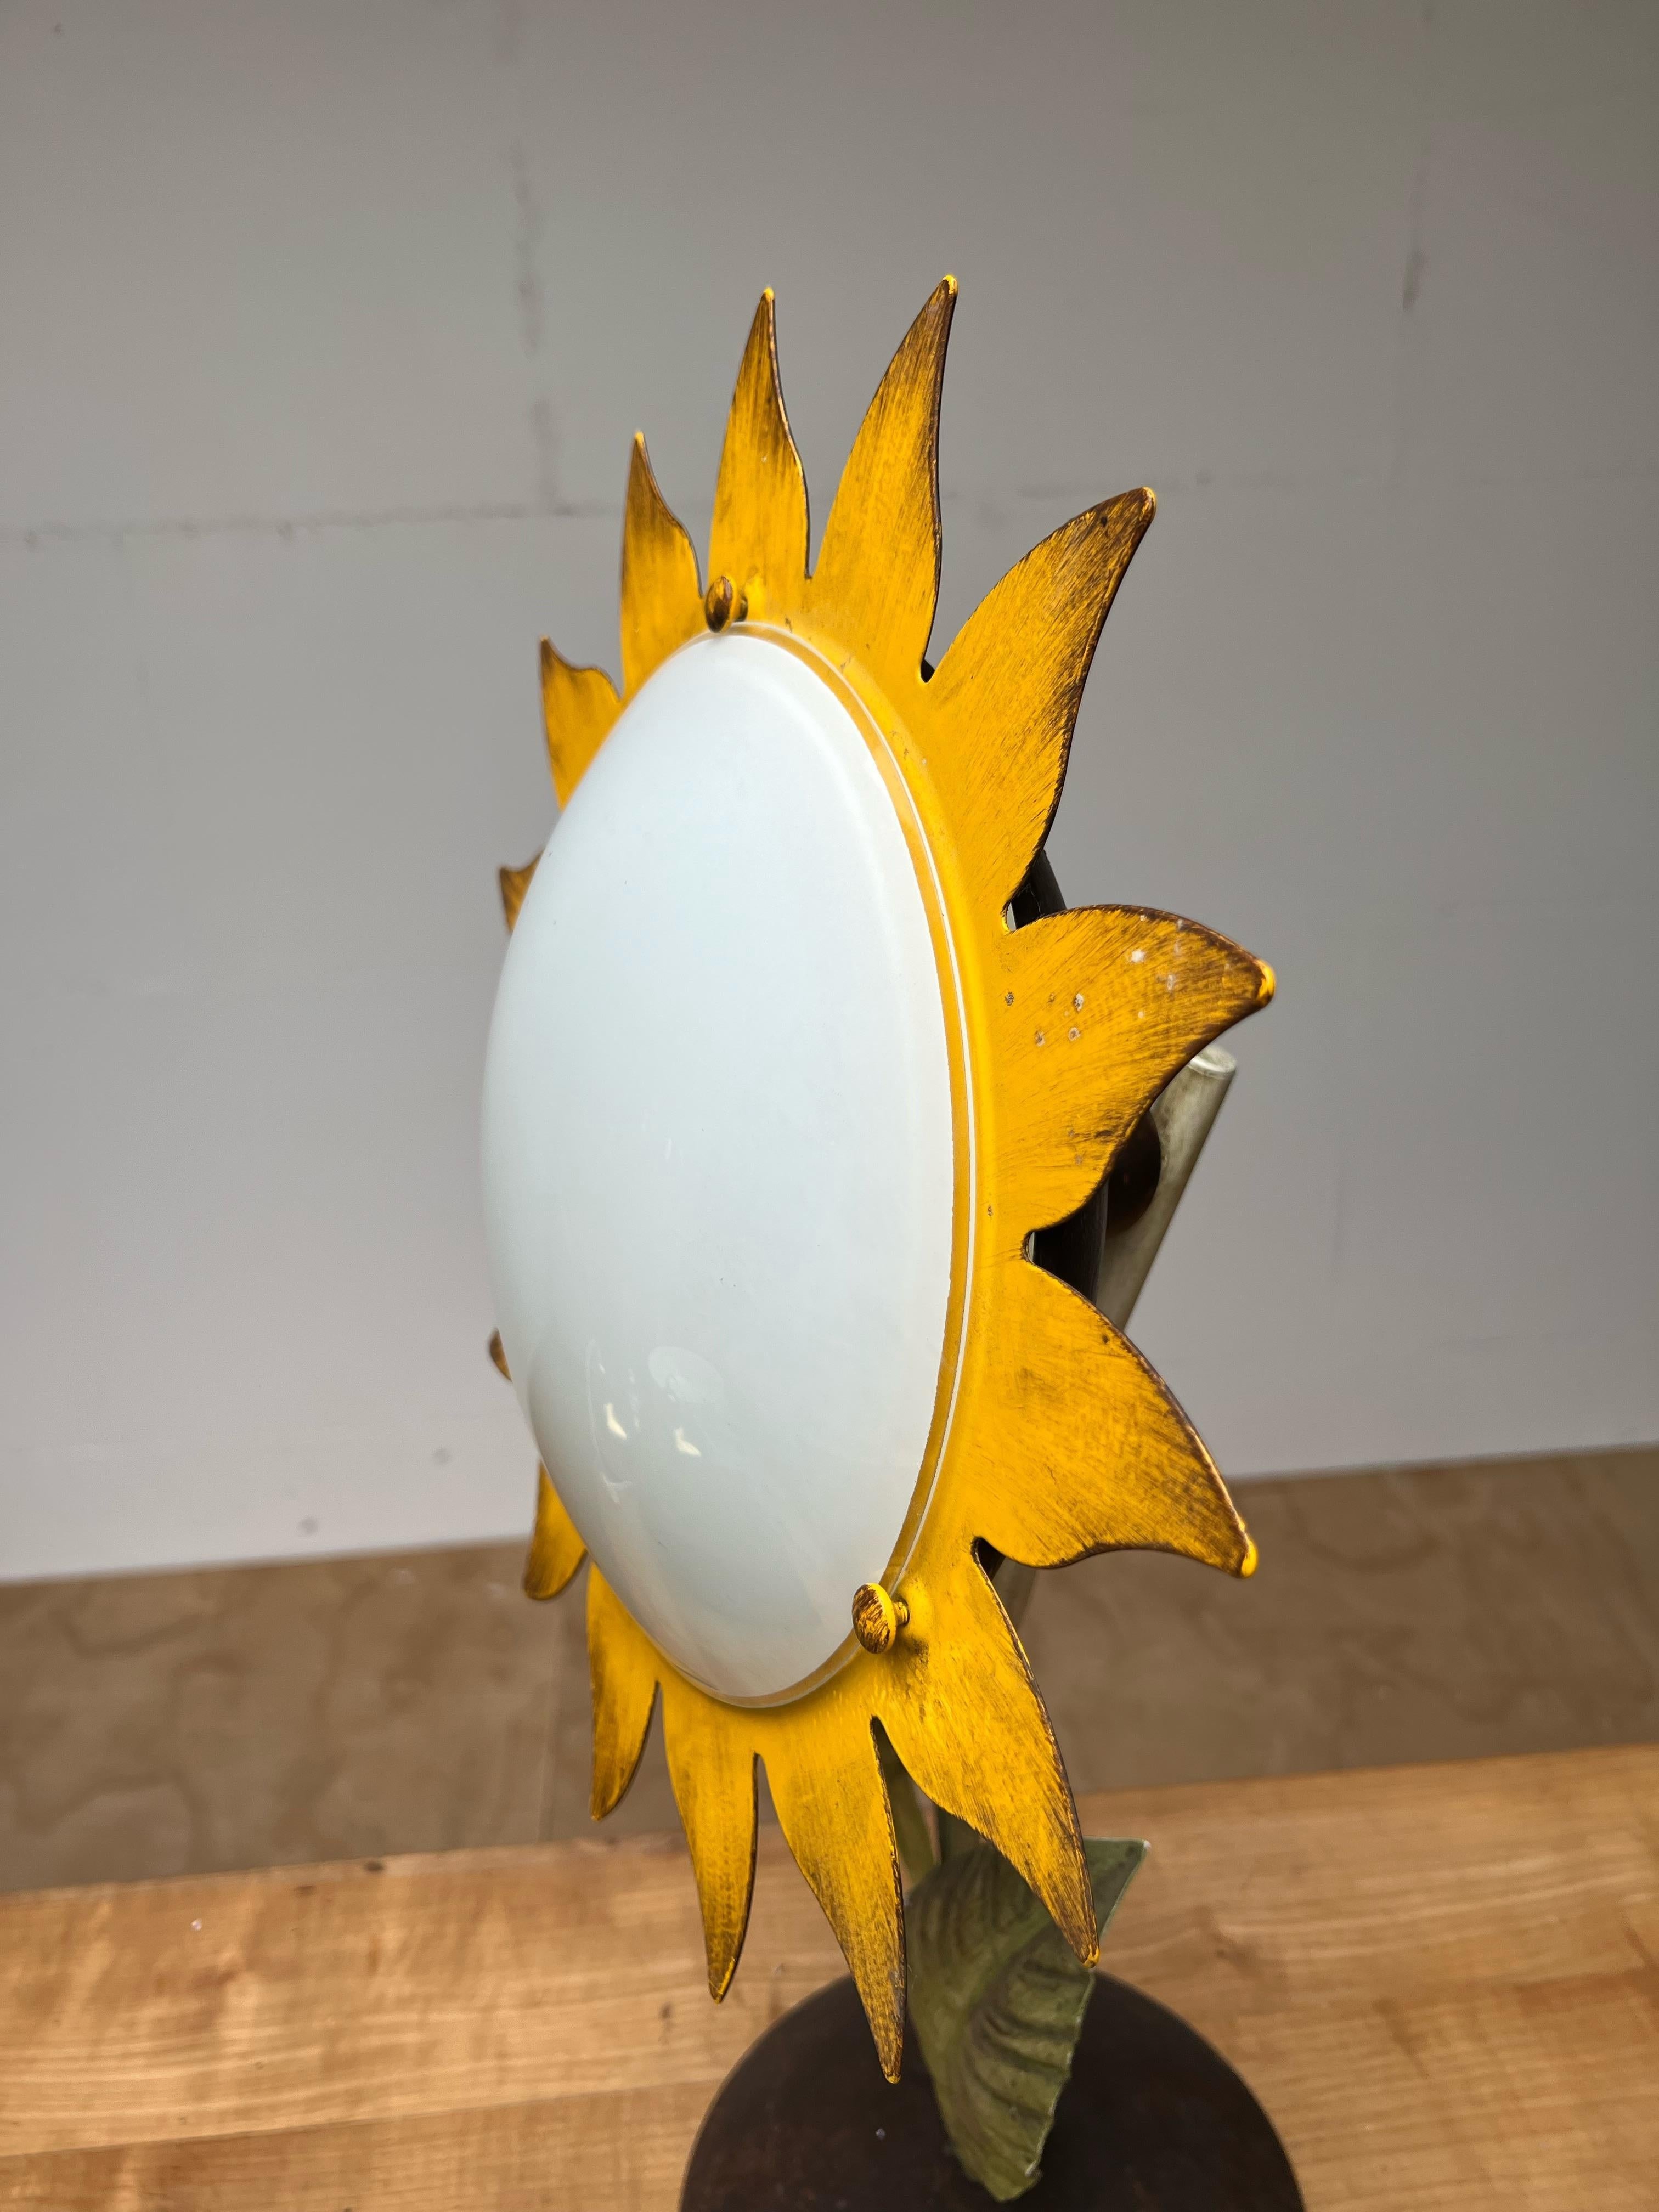 Hand-Crafted Decorative Midcentury Italian Hand Crafted Metal Painted Sunflower Table Lamp For Sale